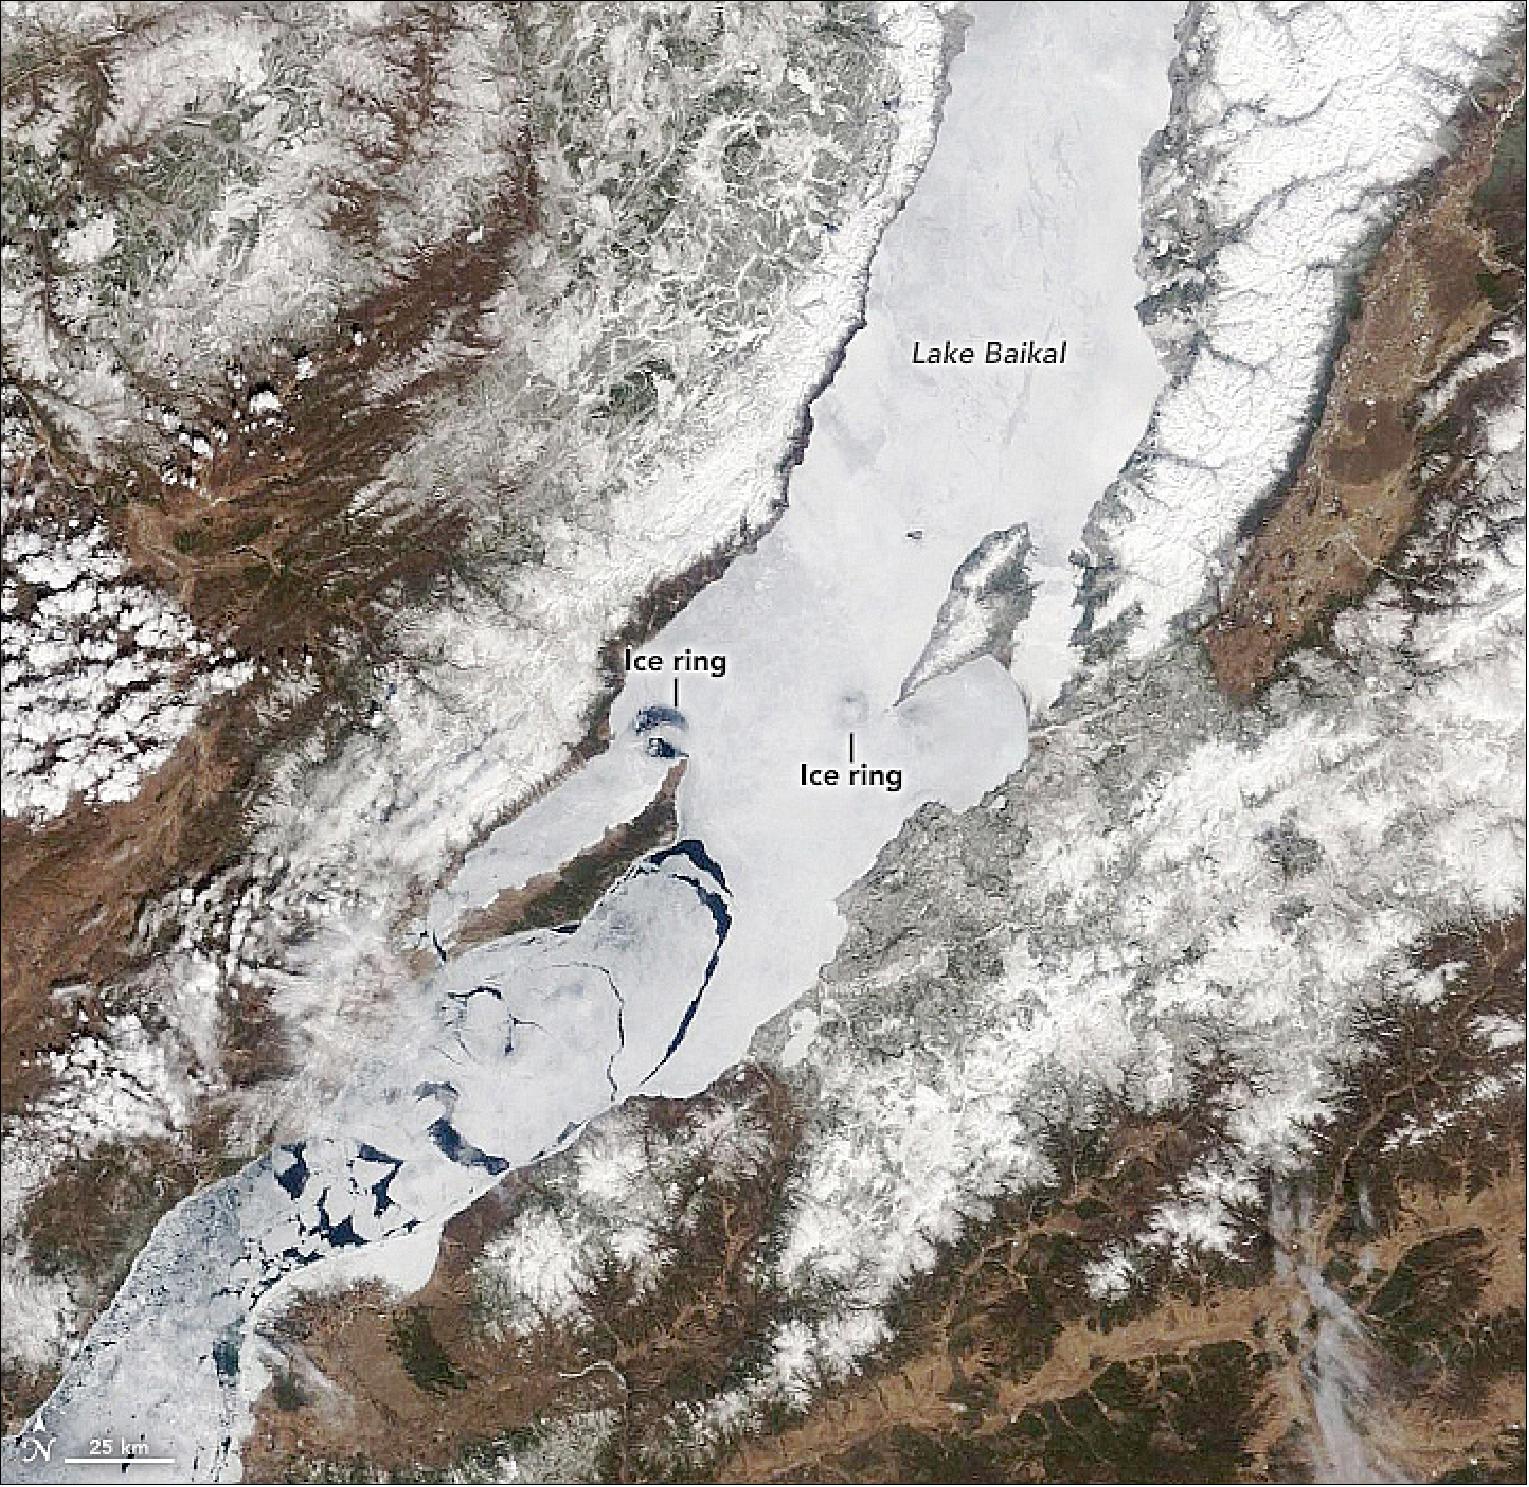 Figure 129: On April 25, 2019, the MODIS (Moderate Resolution Imaging Spectroradiometer) instrument on NASA’s Terra satellite acquired an image of the most recent Baikal ice rings detected by satellites (image credit: NASA Earth Observatory, image by Lauren Dauphin, using MODIS data from NASA EOSDIS/LANCE and GIBS/Worldview)